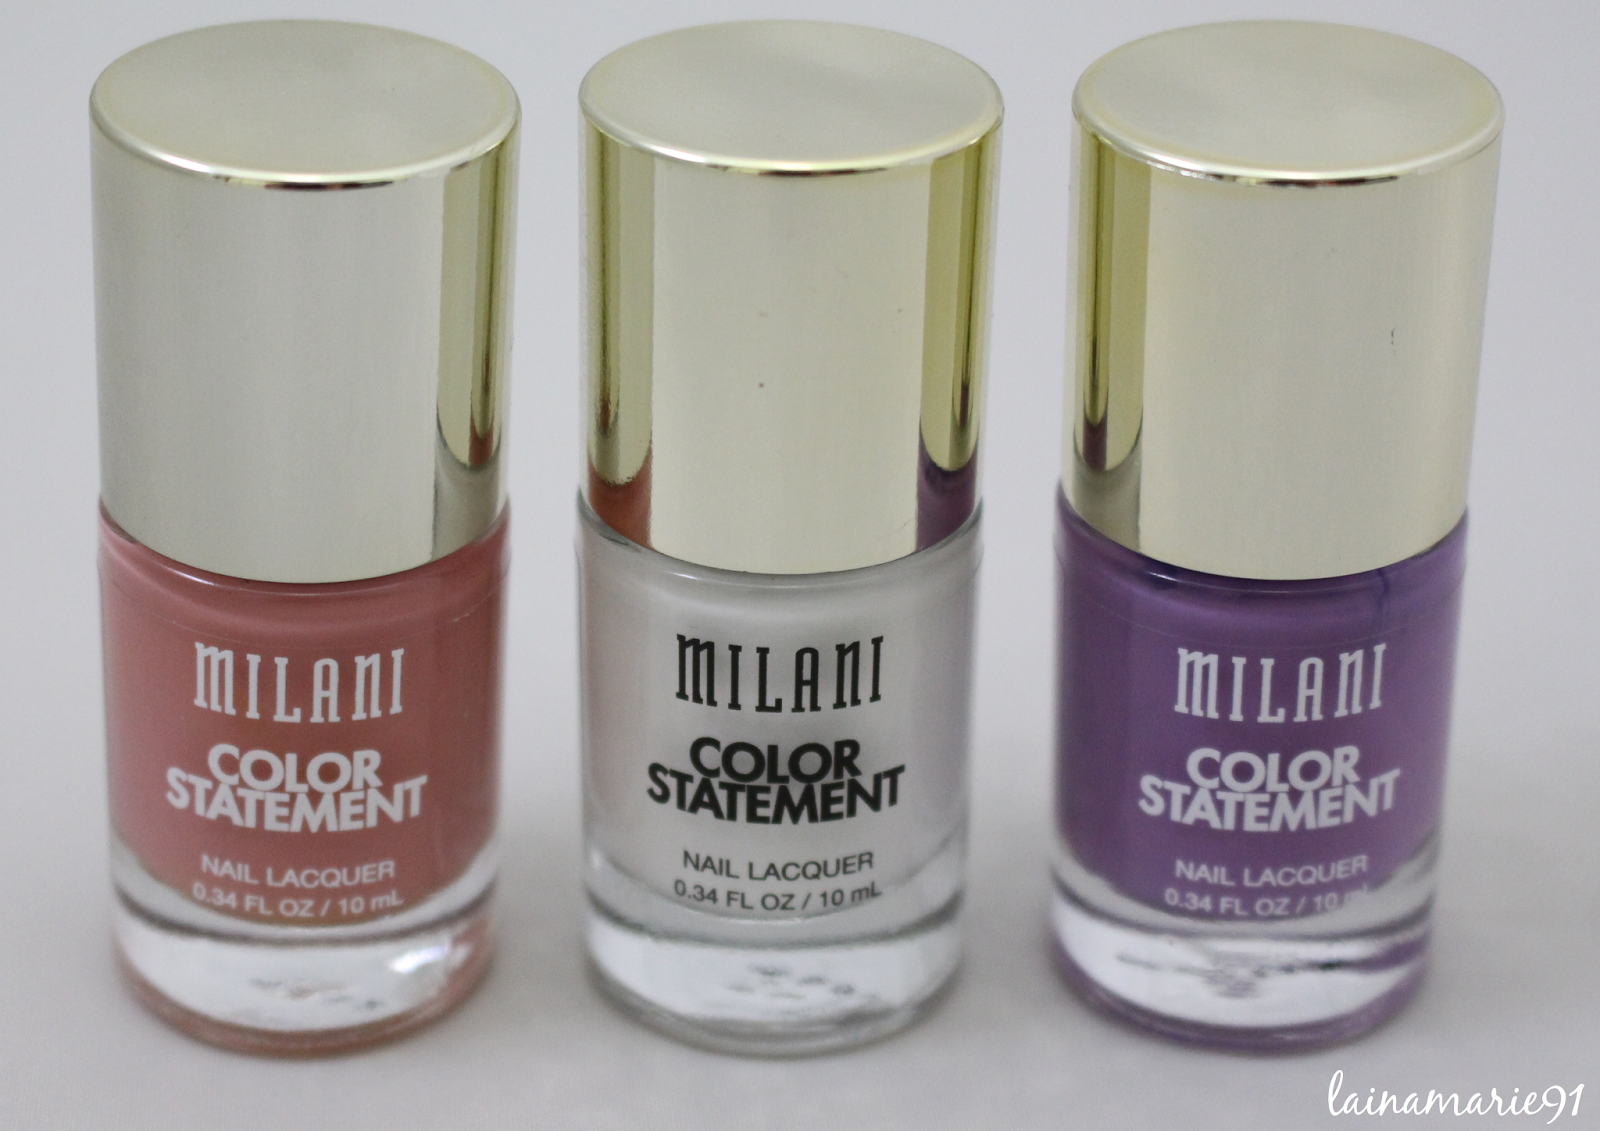 5. Milani Color Statement Nail Lacquer in "Teal Tint" - wide 7